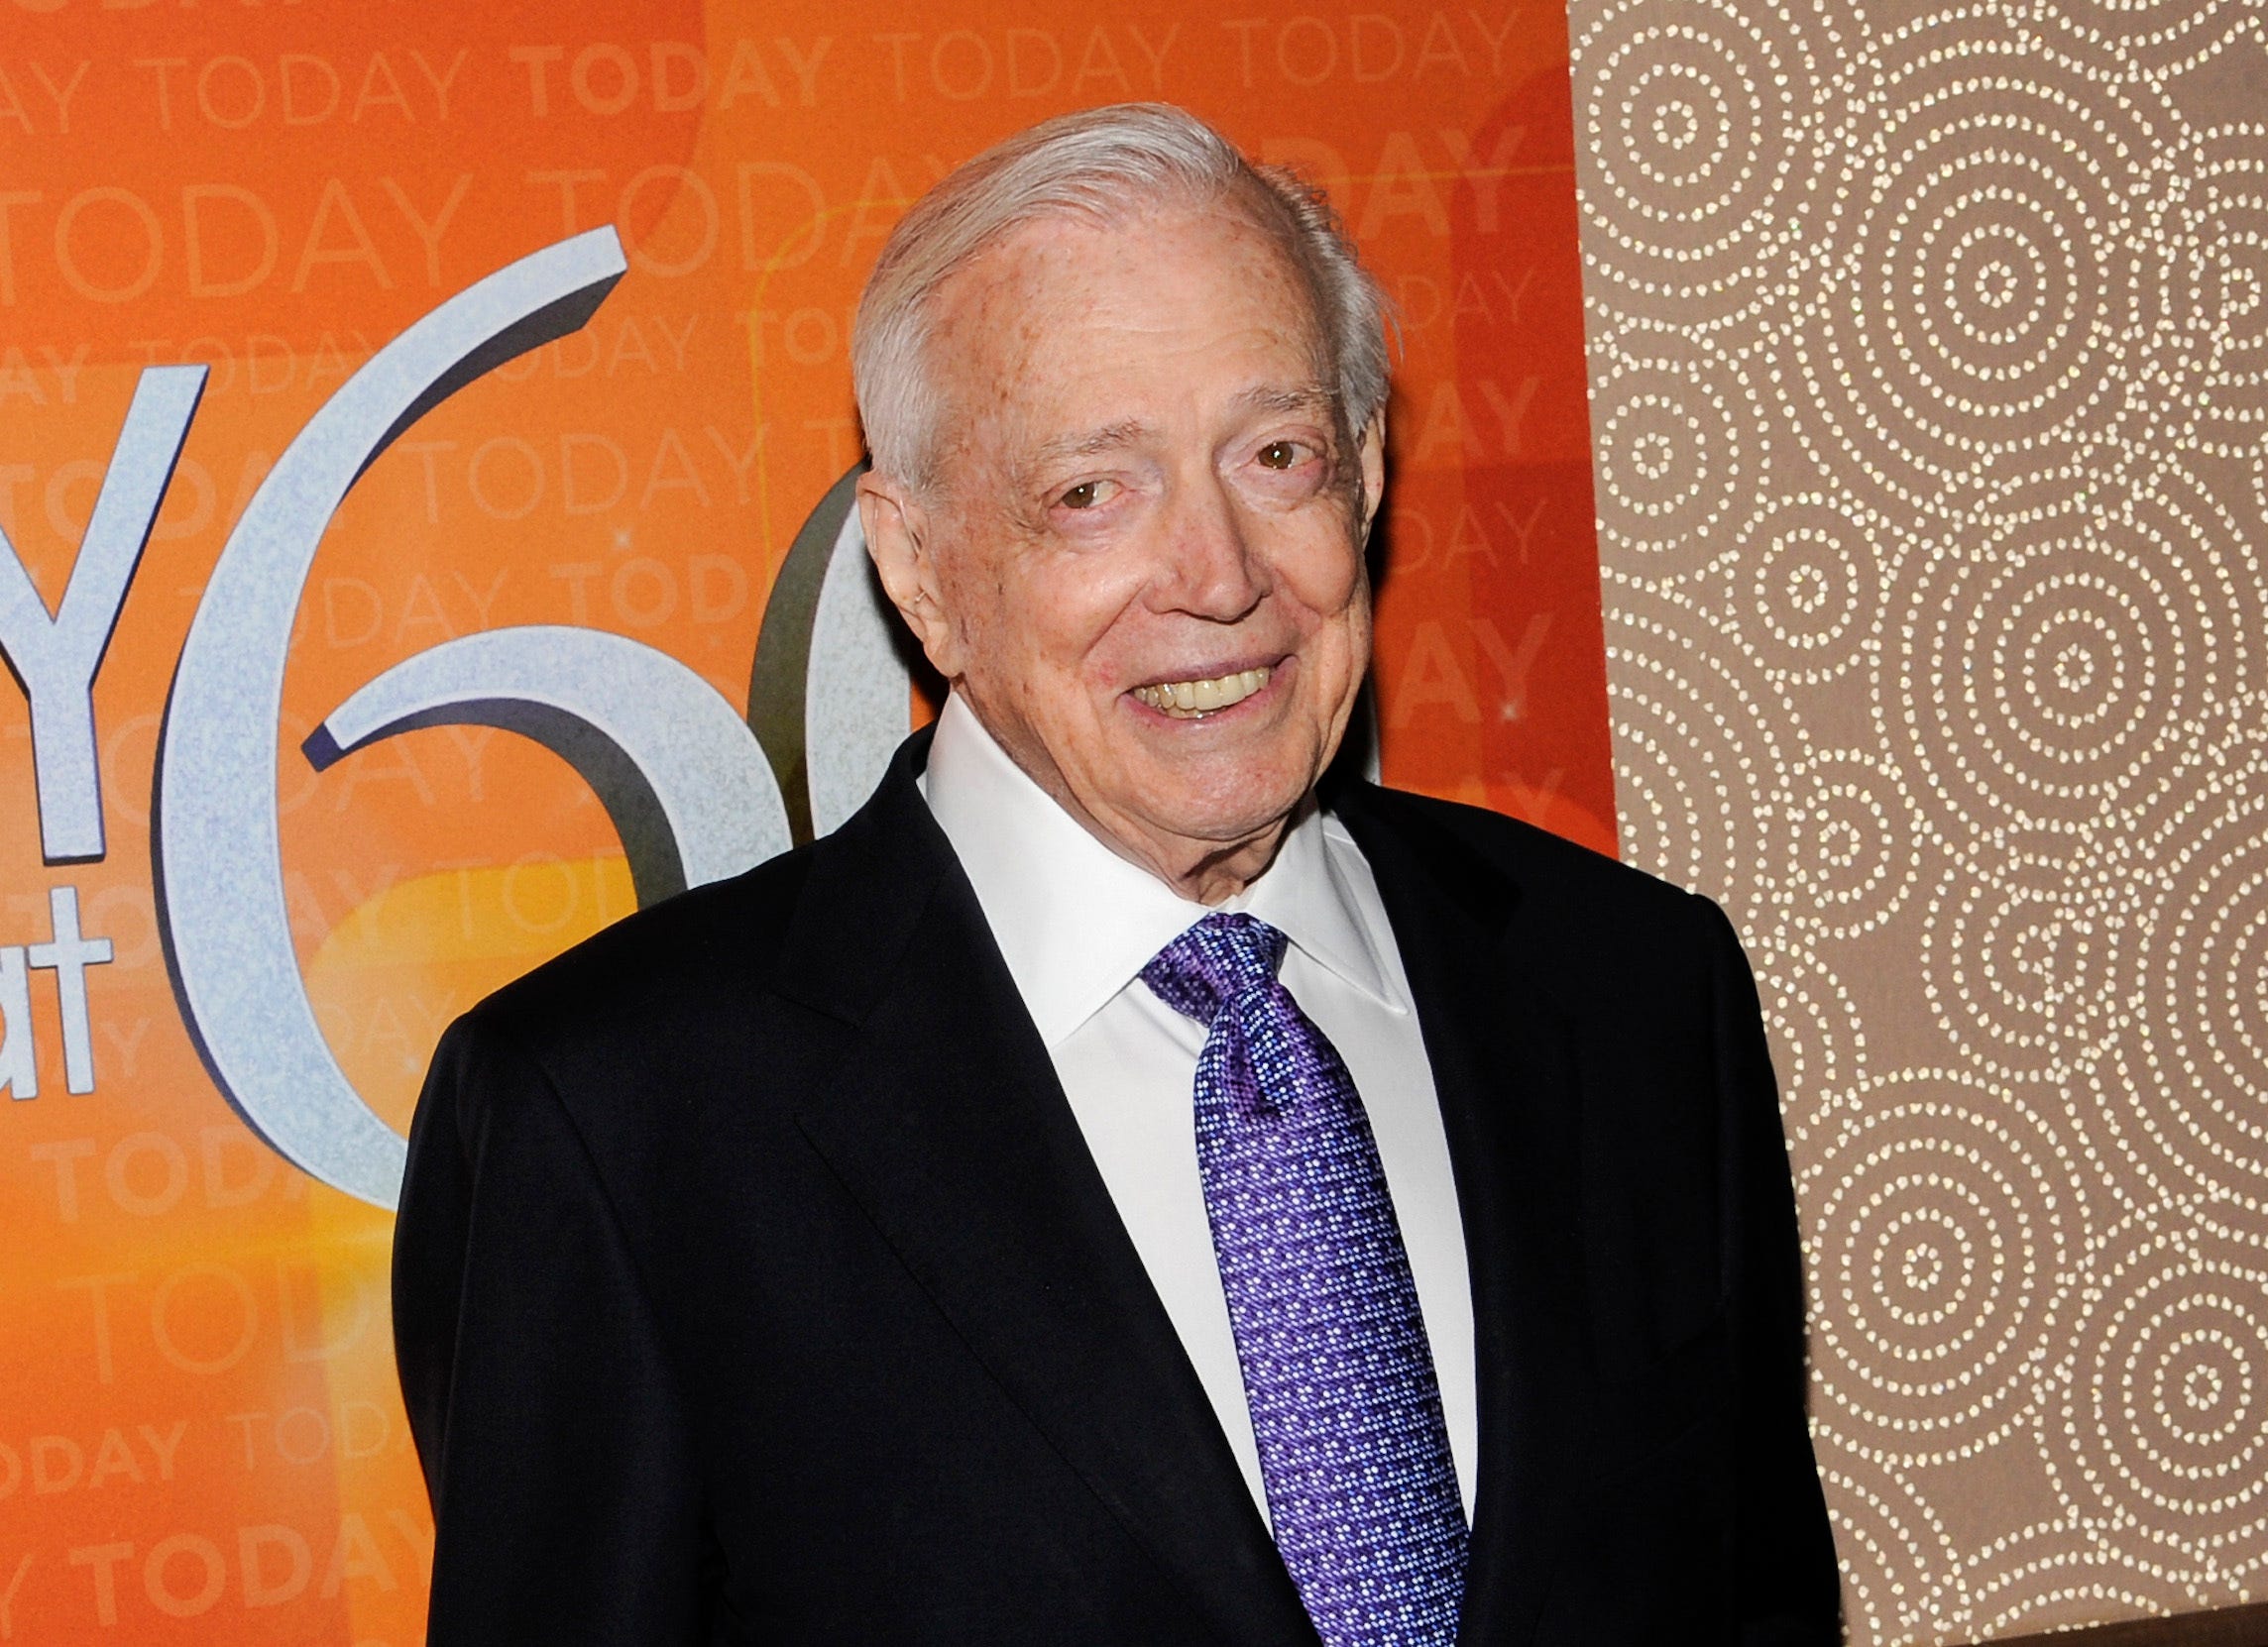 This Jan. 12, 2012 file photo shows Hugh Downs at the "Today" show 60th anniversary celebration in New York. Downs, a genial and near-constant presence on television from the 1950s through the 1990s, has died. His family said Downs died of natural causes Wednesday, July 1, 2020, in Scottsdale, Ariz. He was 99. Downs was a host of the ‘Today’ show on NBC, worked on the ‘Tonight’ show when Jack Paar was in charge, and hosted the long-running game show "Concentration."  